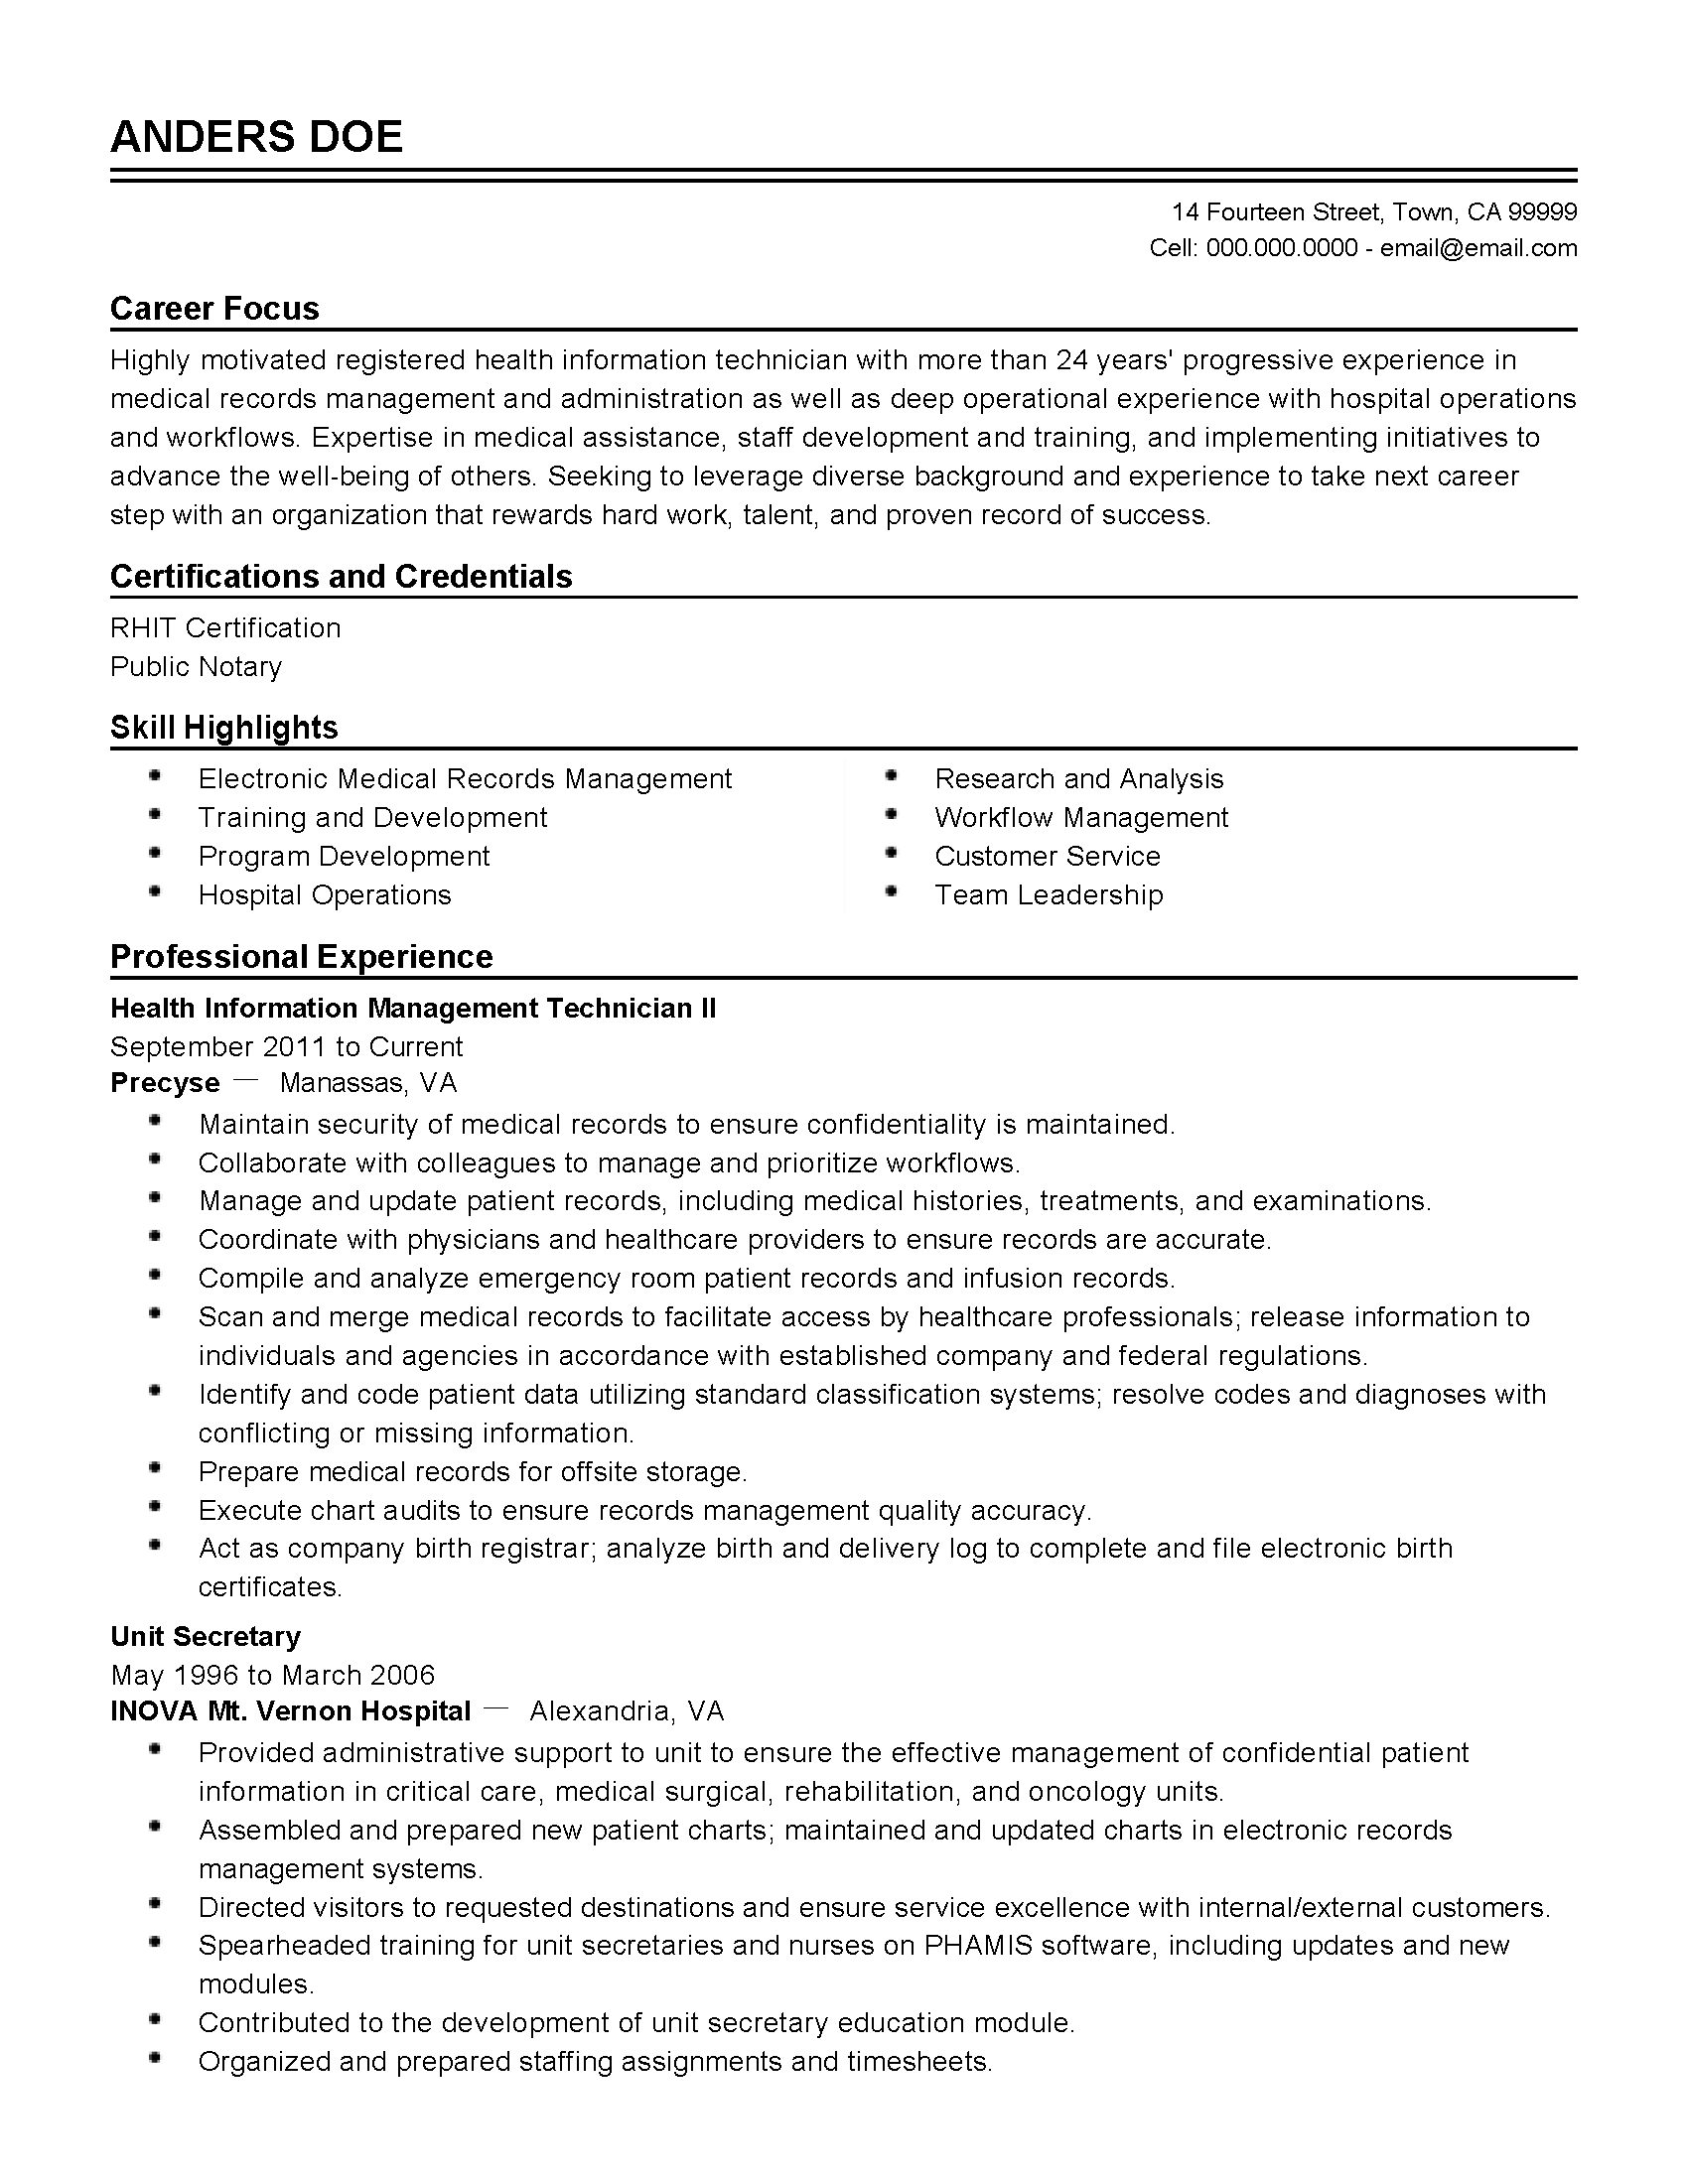 College Resume Template College Student Resume Template Professional Health Information